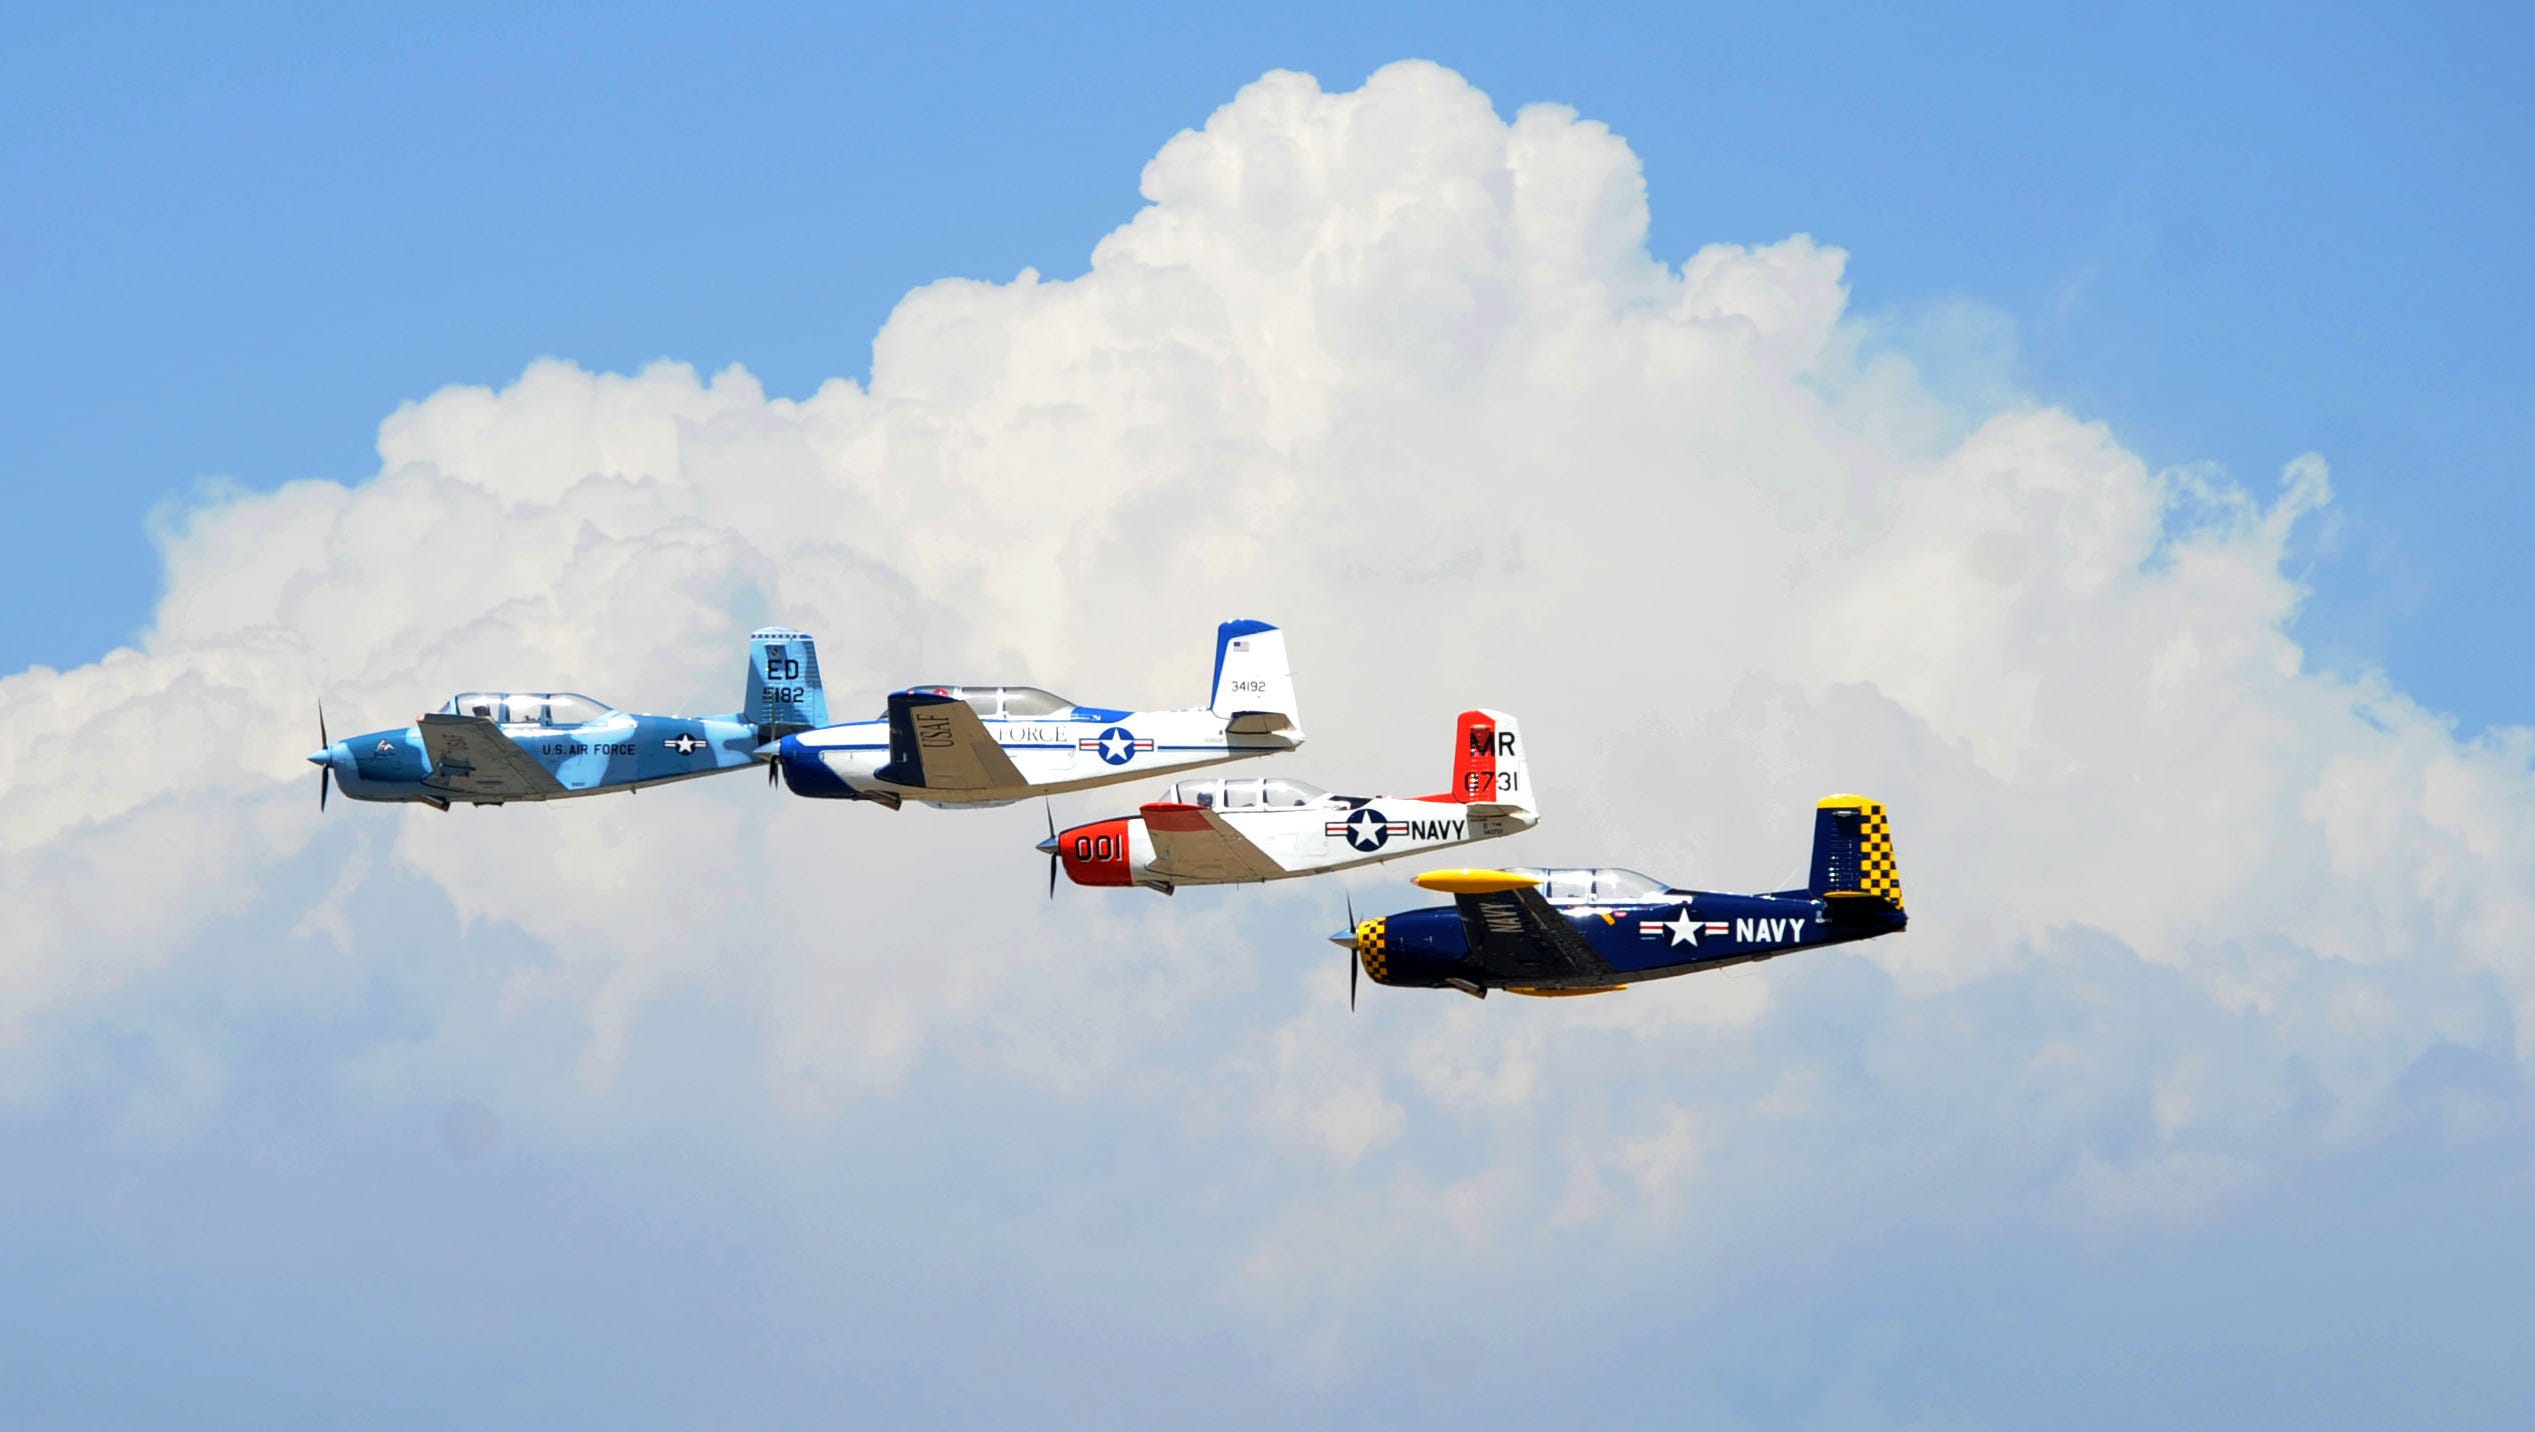 Eyes turn to skies for Wings Over Camarillo air show